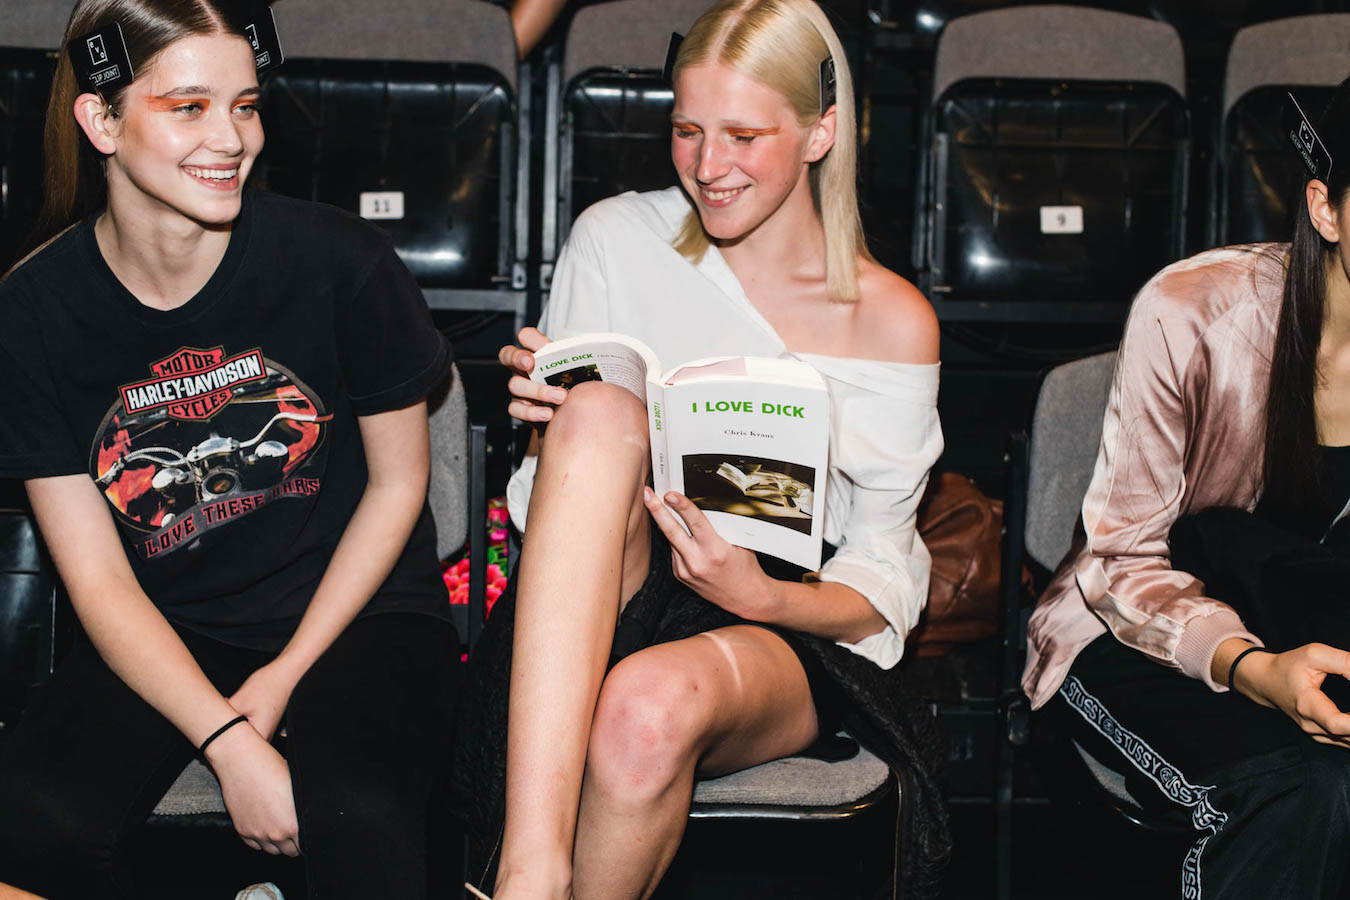 Diary of a runway model: What fashion week looks like from the other side